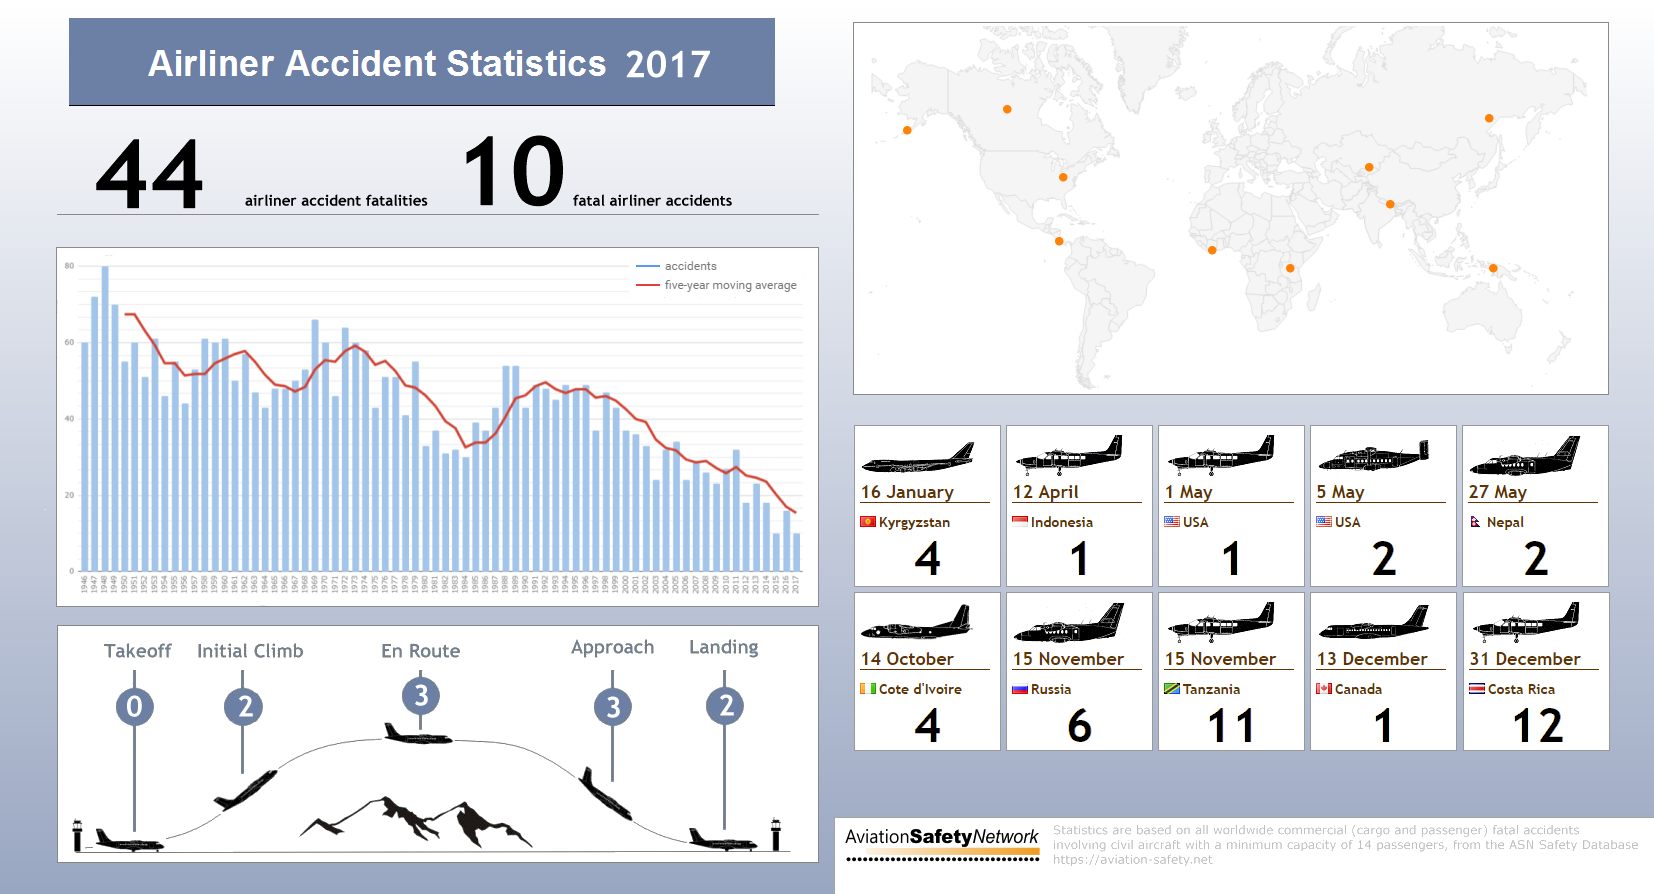 air travel safety record